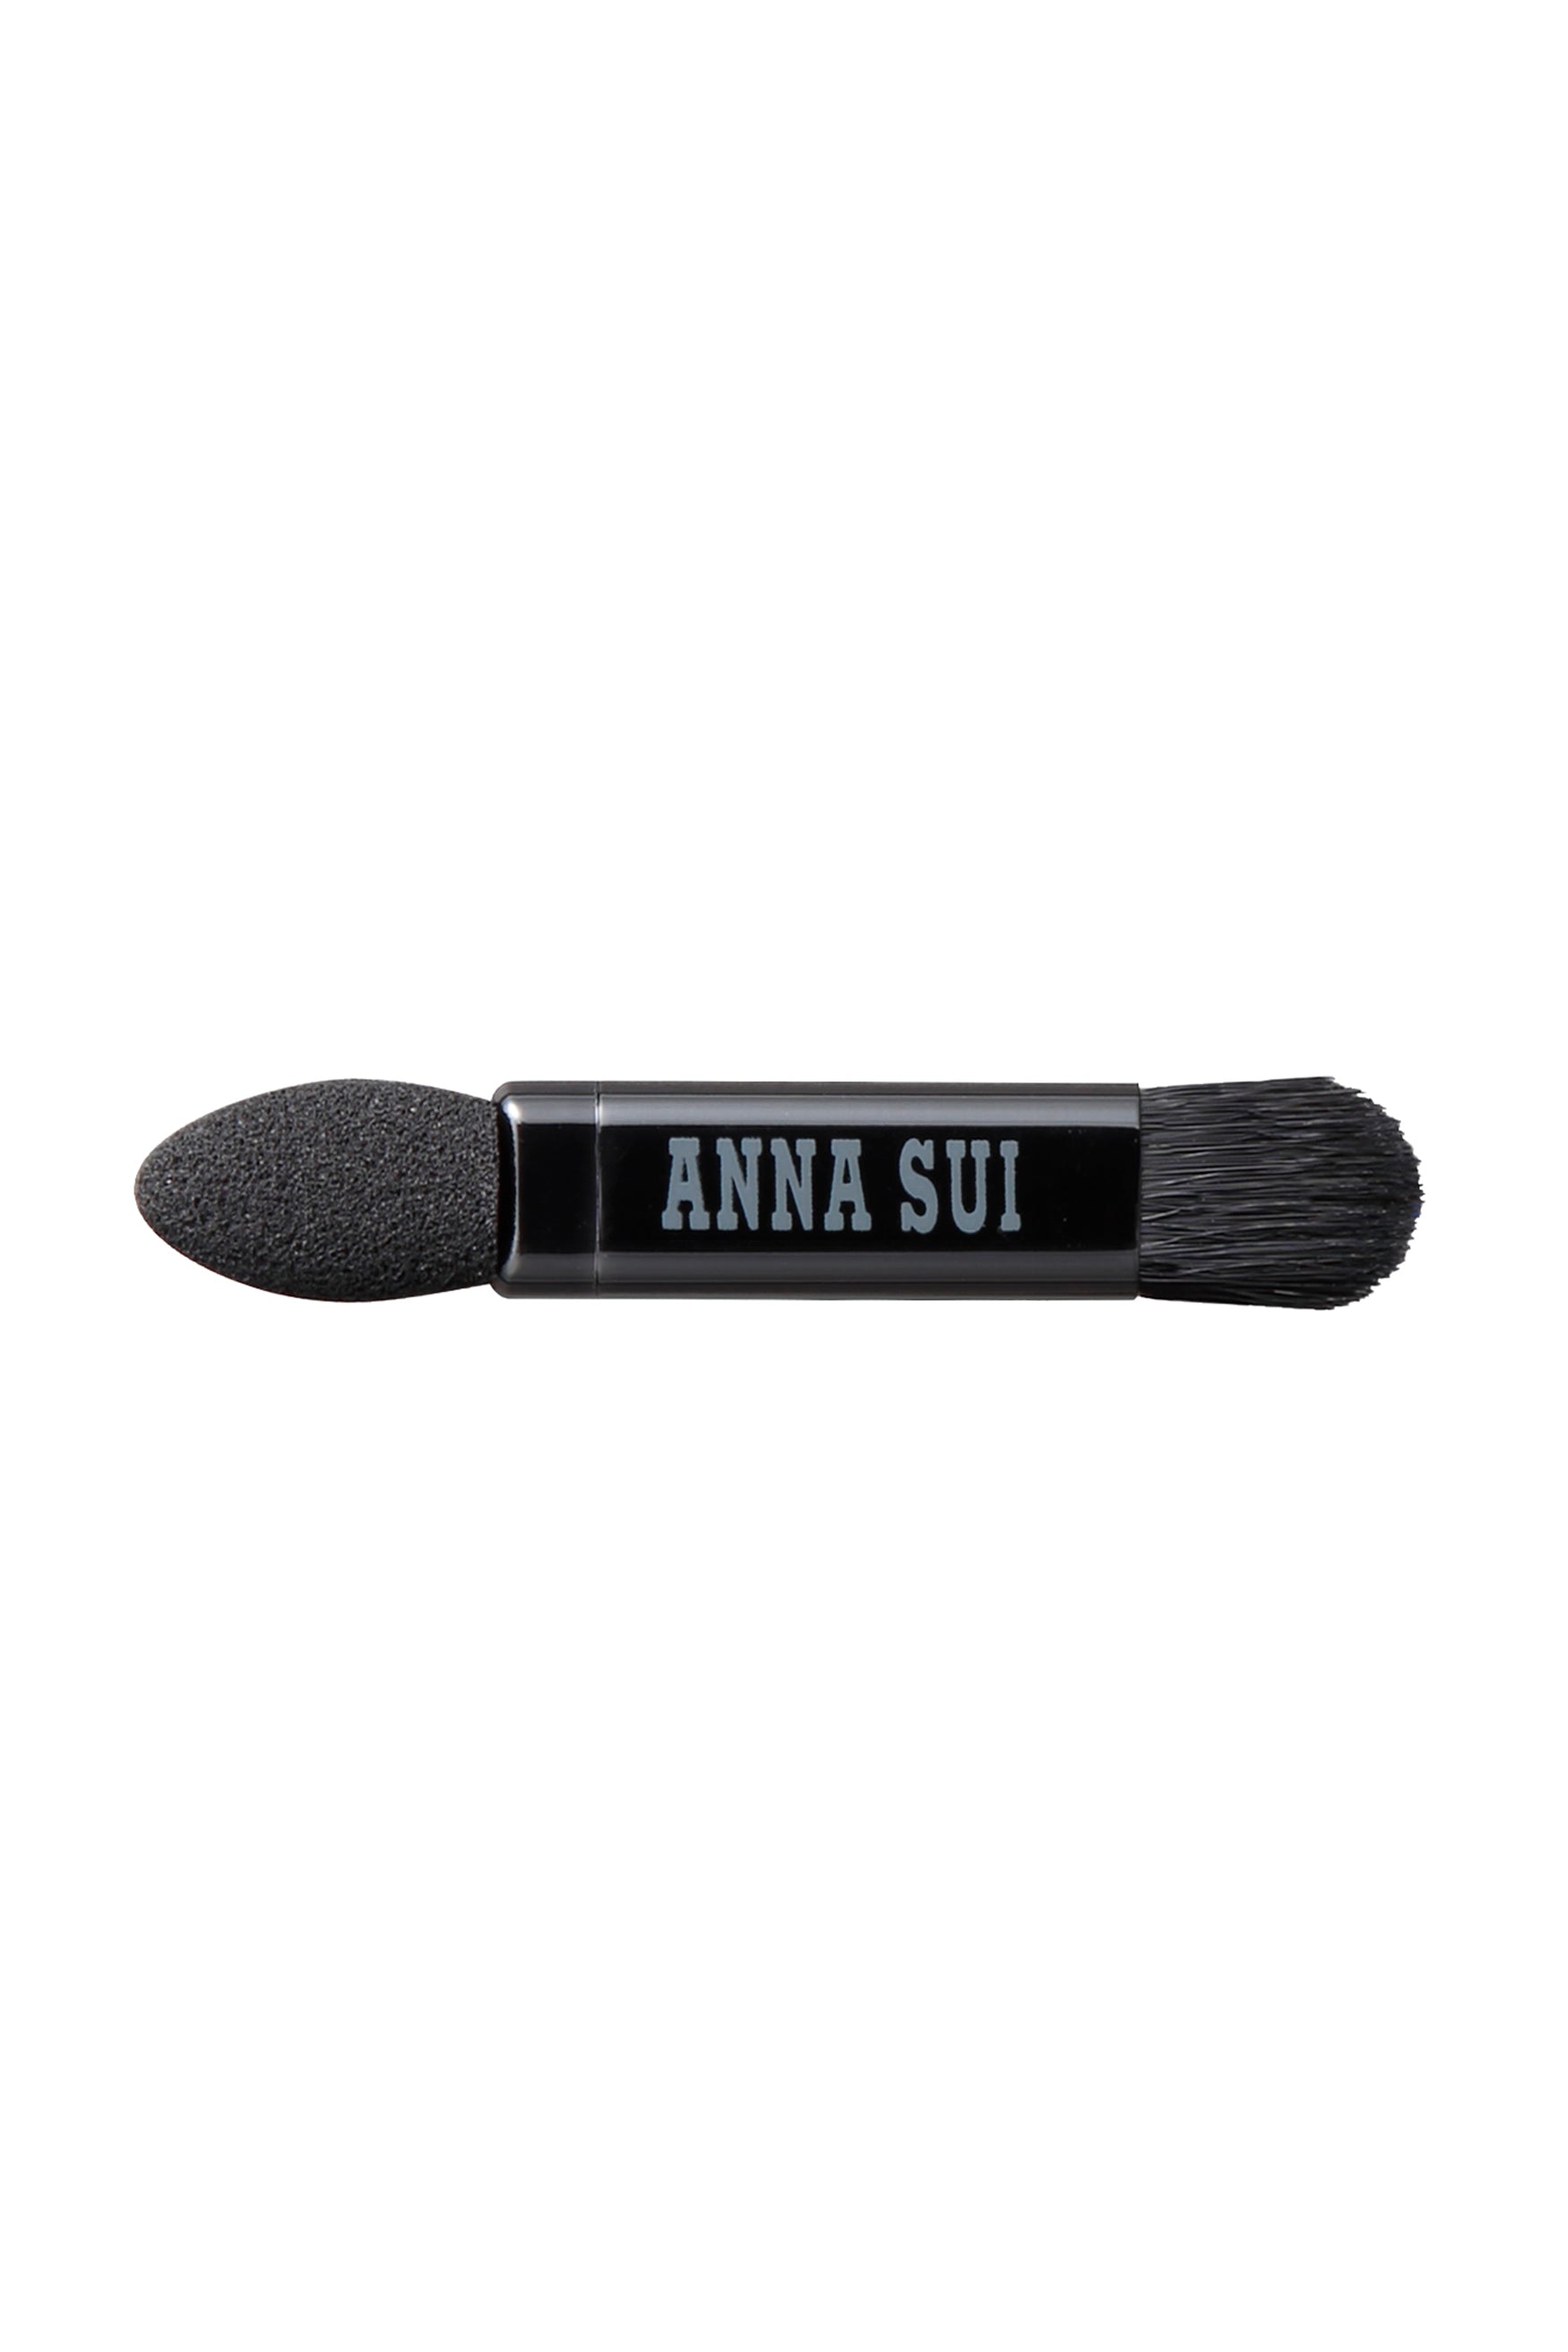 The applicator, a hard head on one side, a Bruch on the other, Anna Sui label on the middle of it